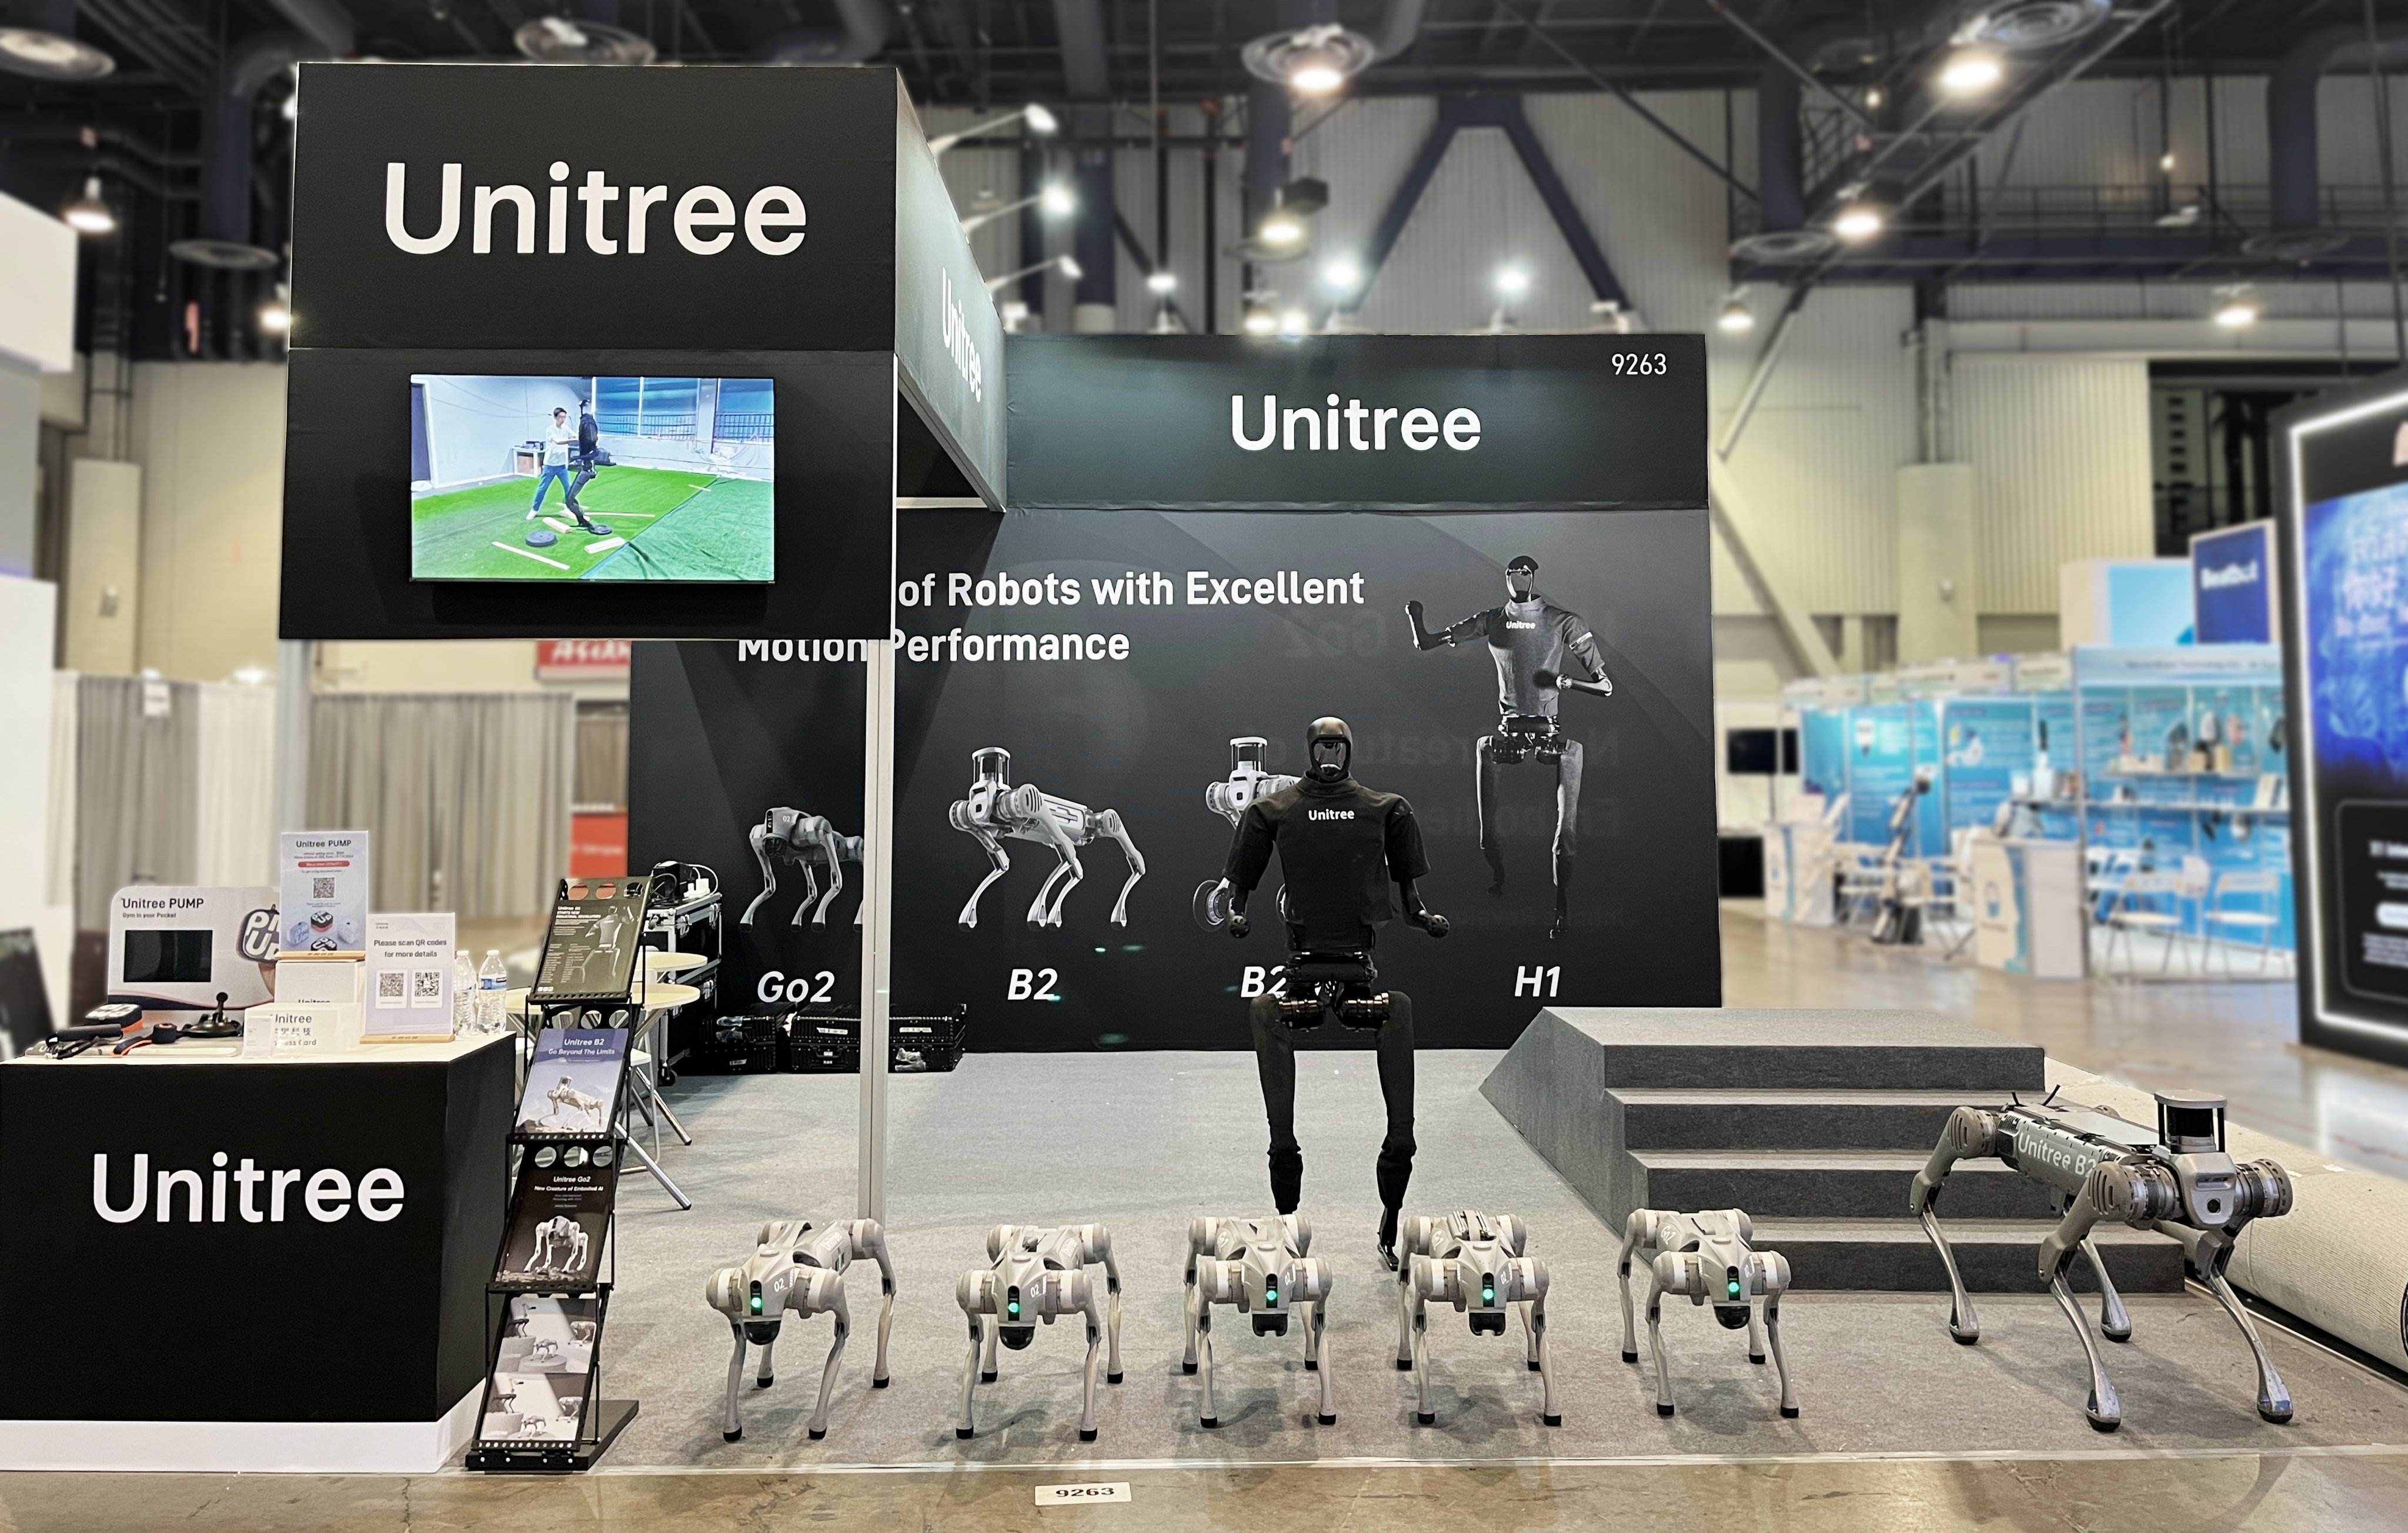 Unitree says its H1 robot, which is now at iteration 4.0, is China’s first full-sized, all-purpose humanoid robot capable of doing backflips and running. Photo: Handout